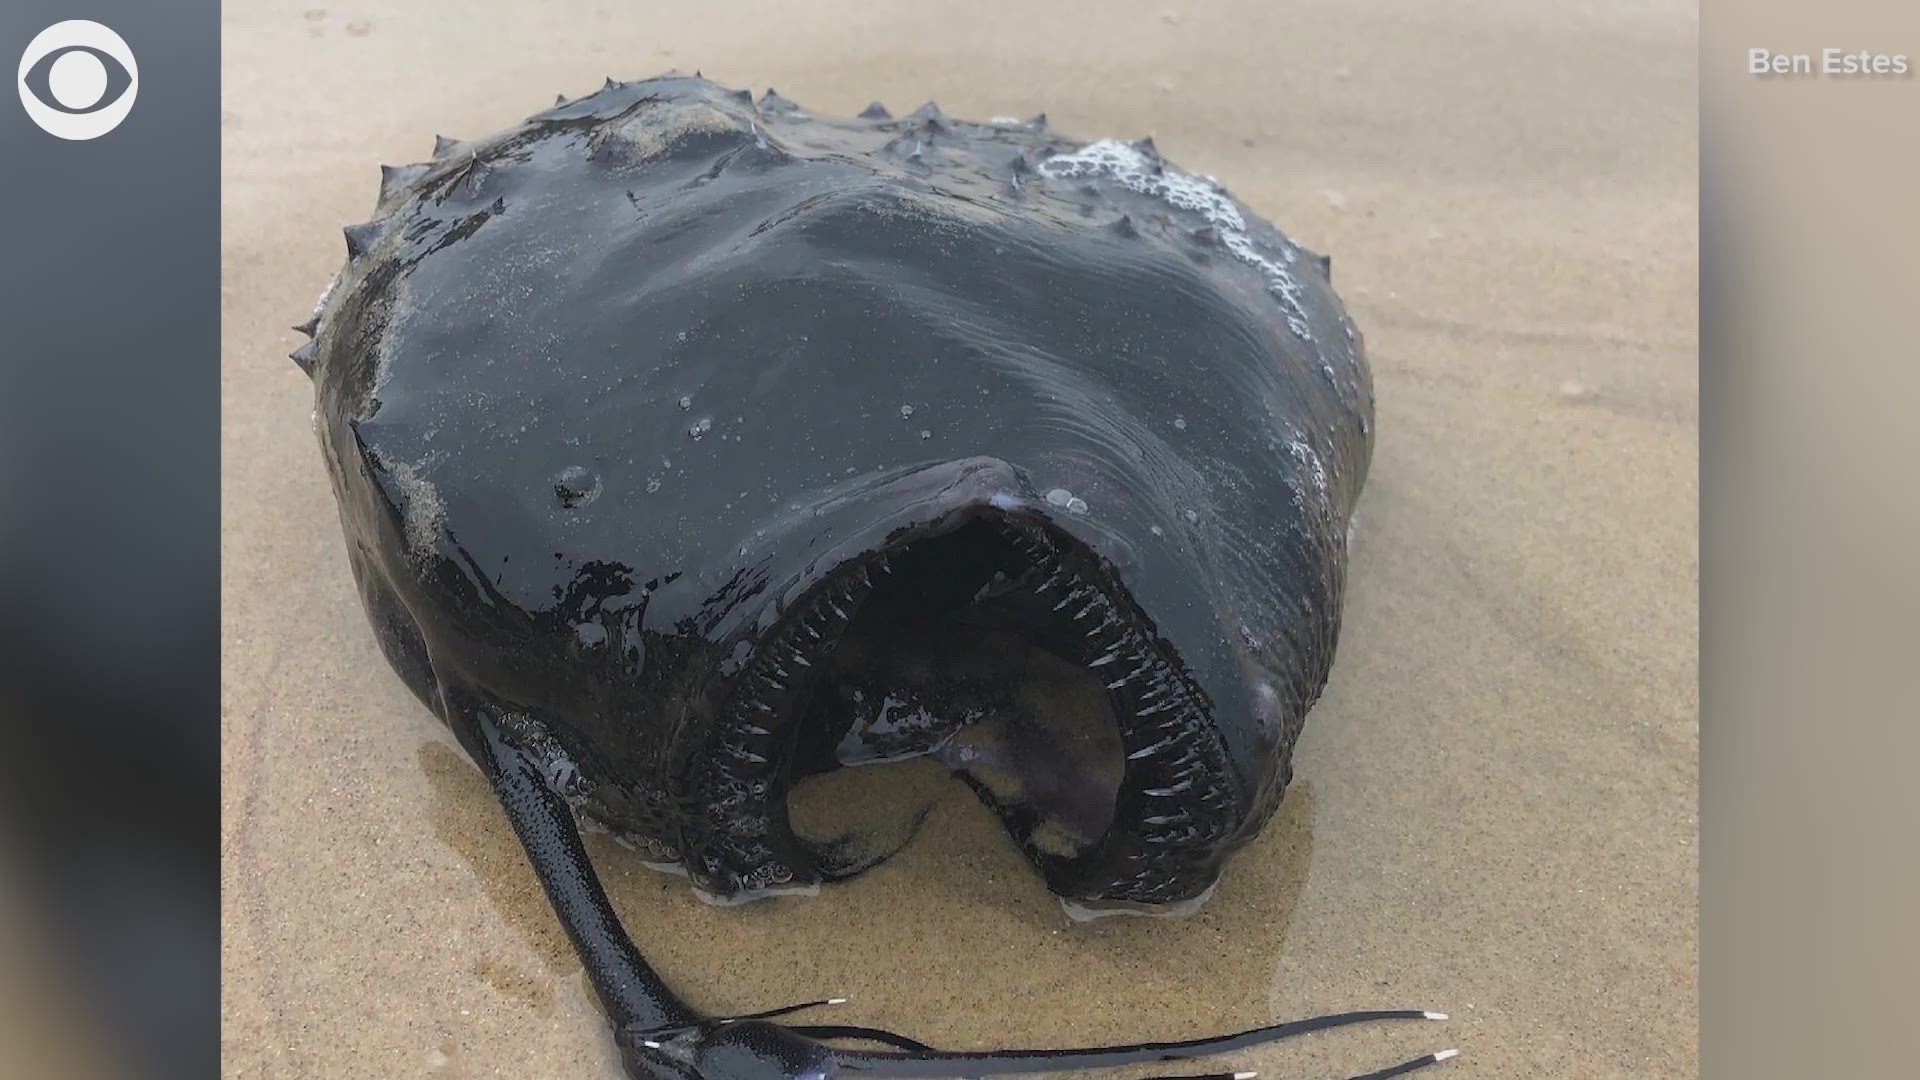 A Pacific Football Fish was found washed ashore in Crystal Cove State Park's Marine Protected Area in California on Friday (5/7).